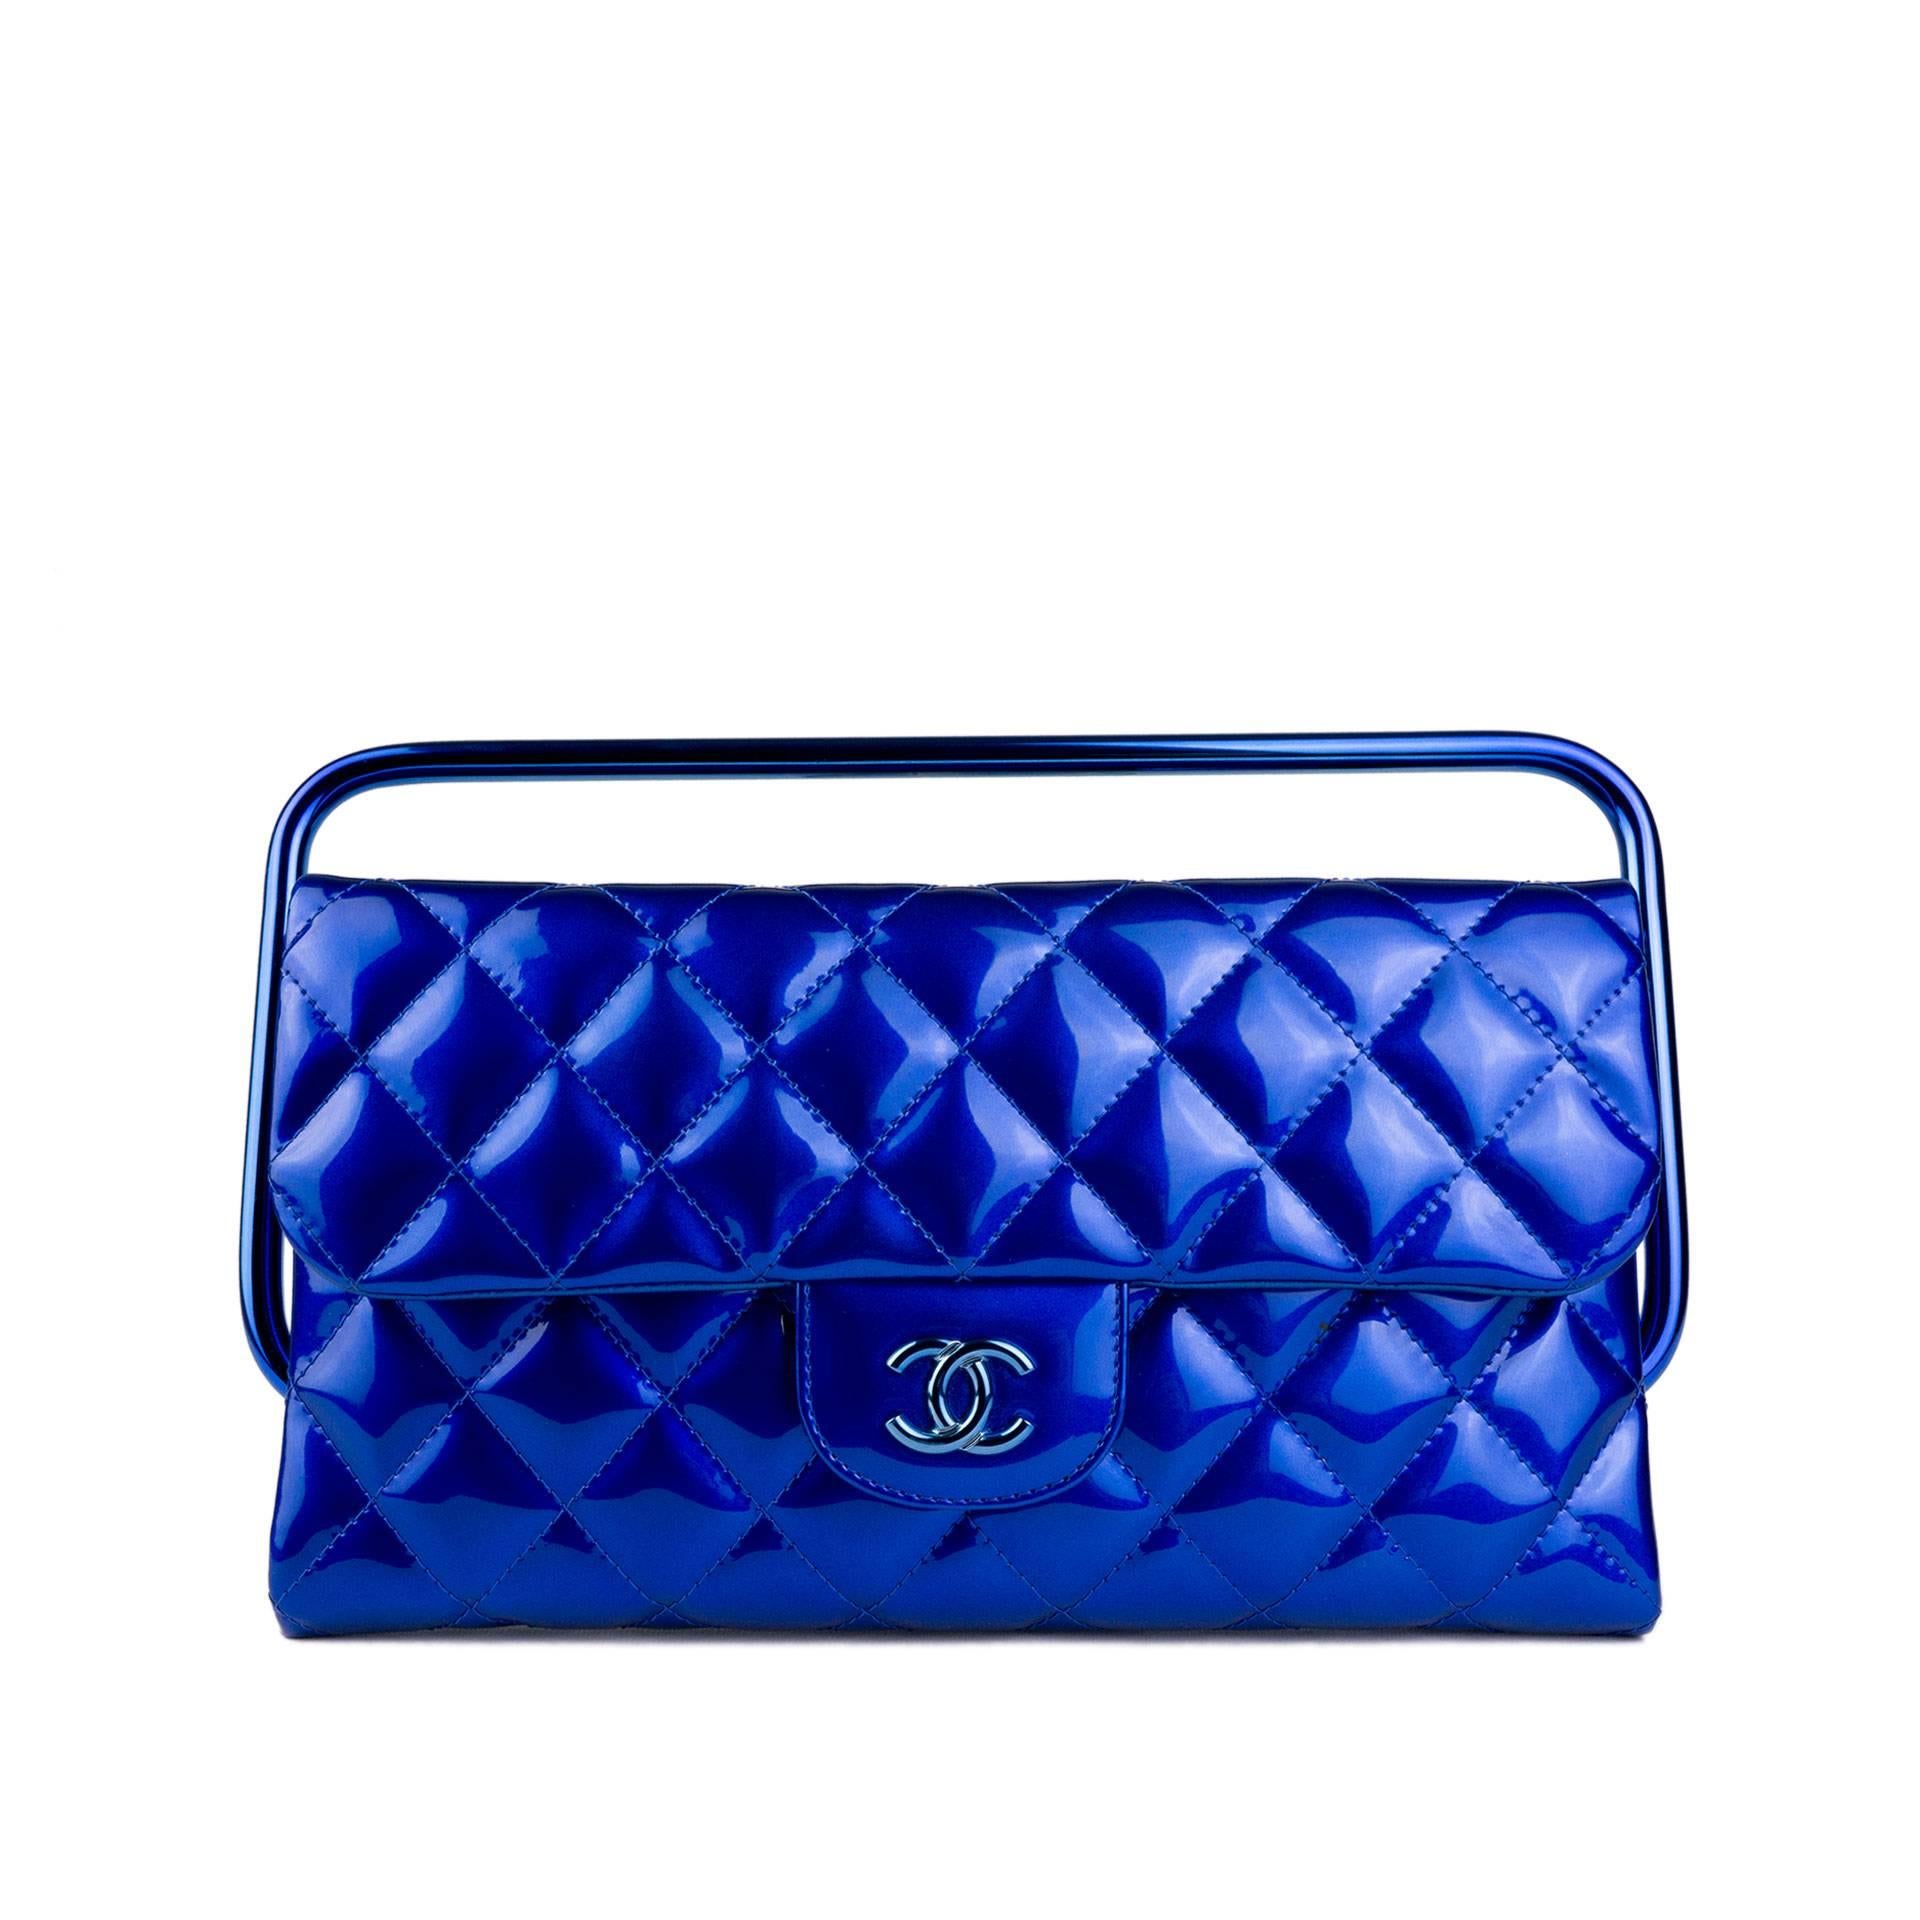 Chanel 2014 Electric Blue Patent Leather Quilted Retractable Frame Clutch Bag For Sale 1